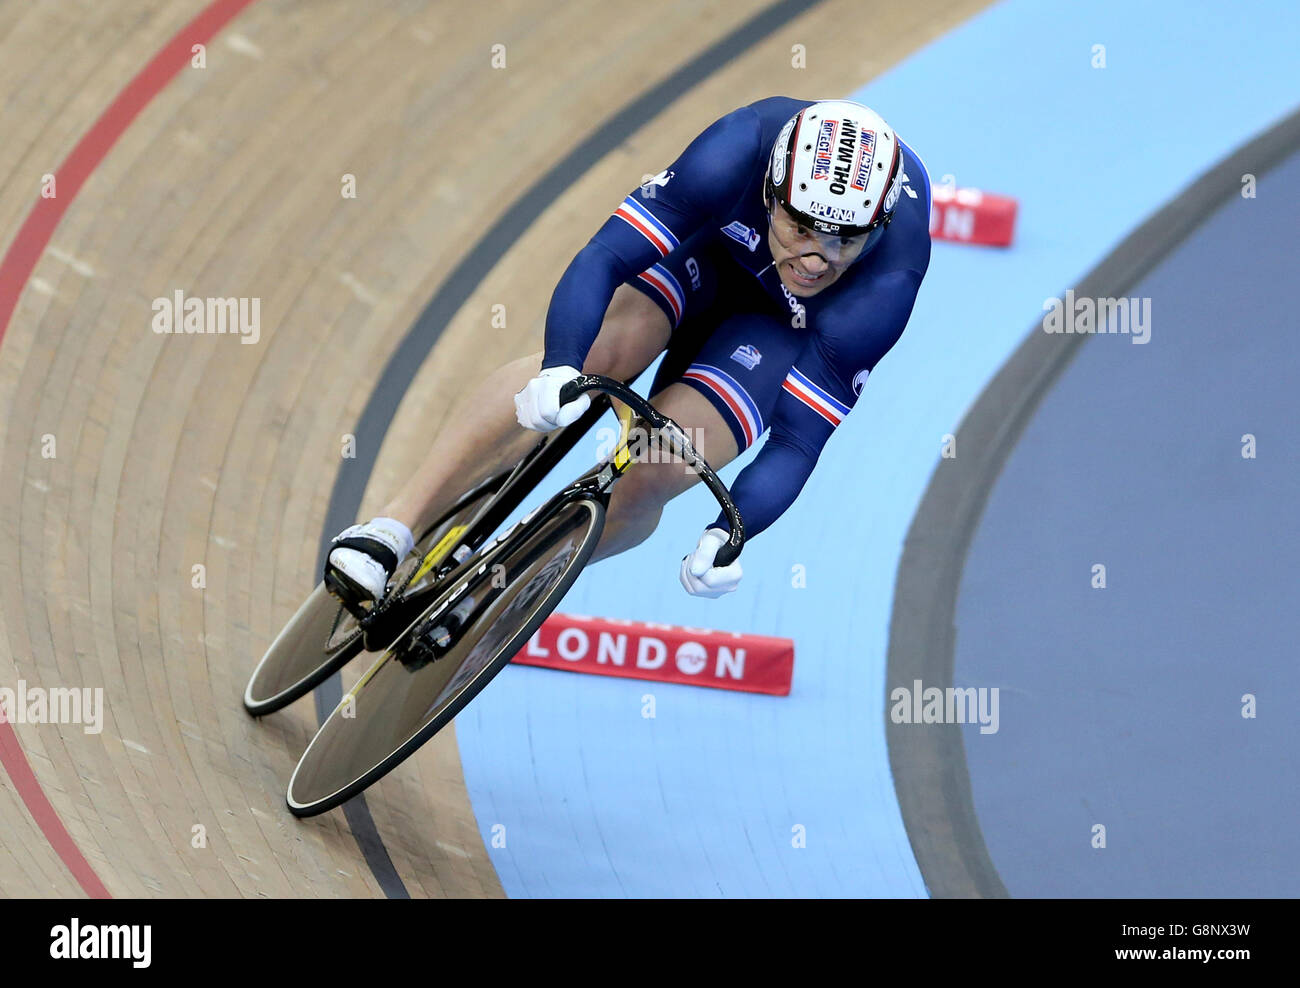 France's Francois Pervis competes in the Men's Sprint during day three of the UCI Track Cycling World Championships at Lee Valley VeloPark, London. PRESS ASSOCIATION Photo. Picture date: Friday March 4, 2016. See PA story CYCLING World. Photo credit should read: Tim Goode/PA Wire. Stock Photo